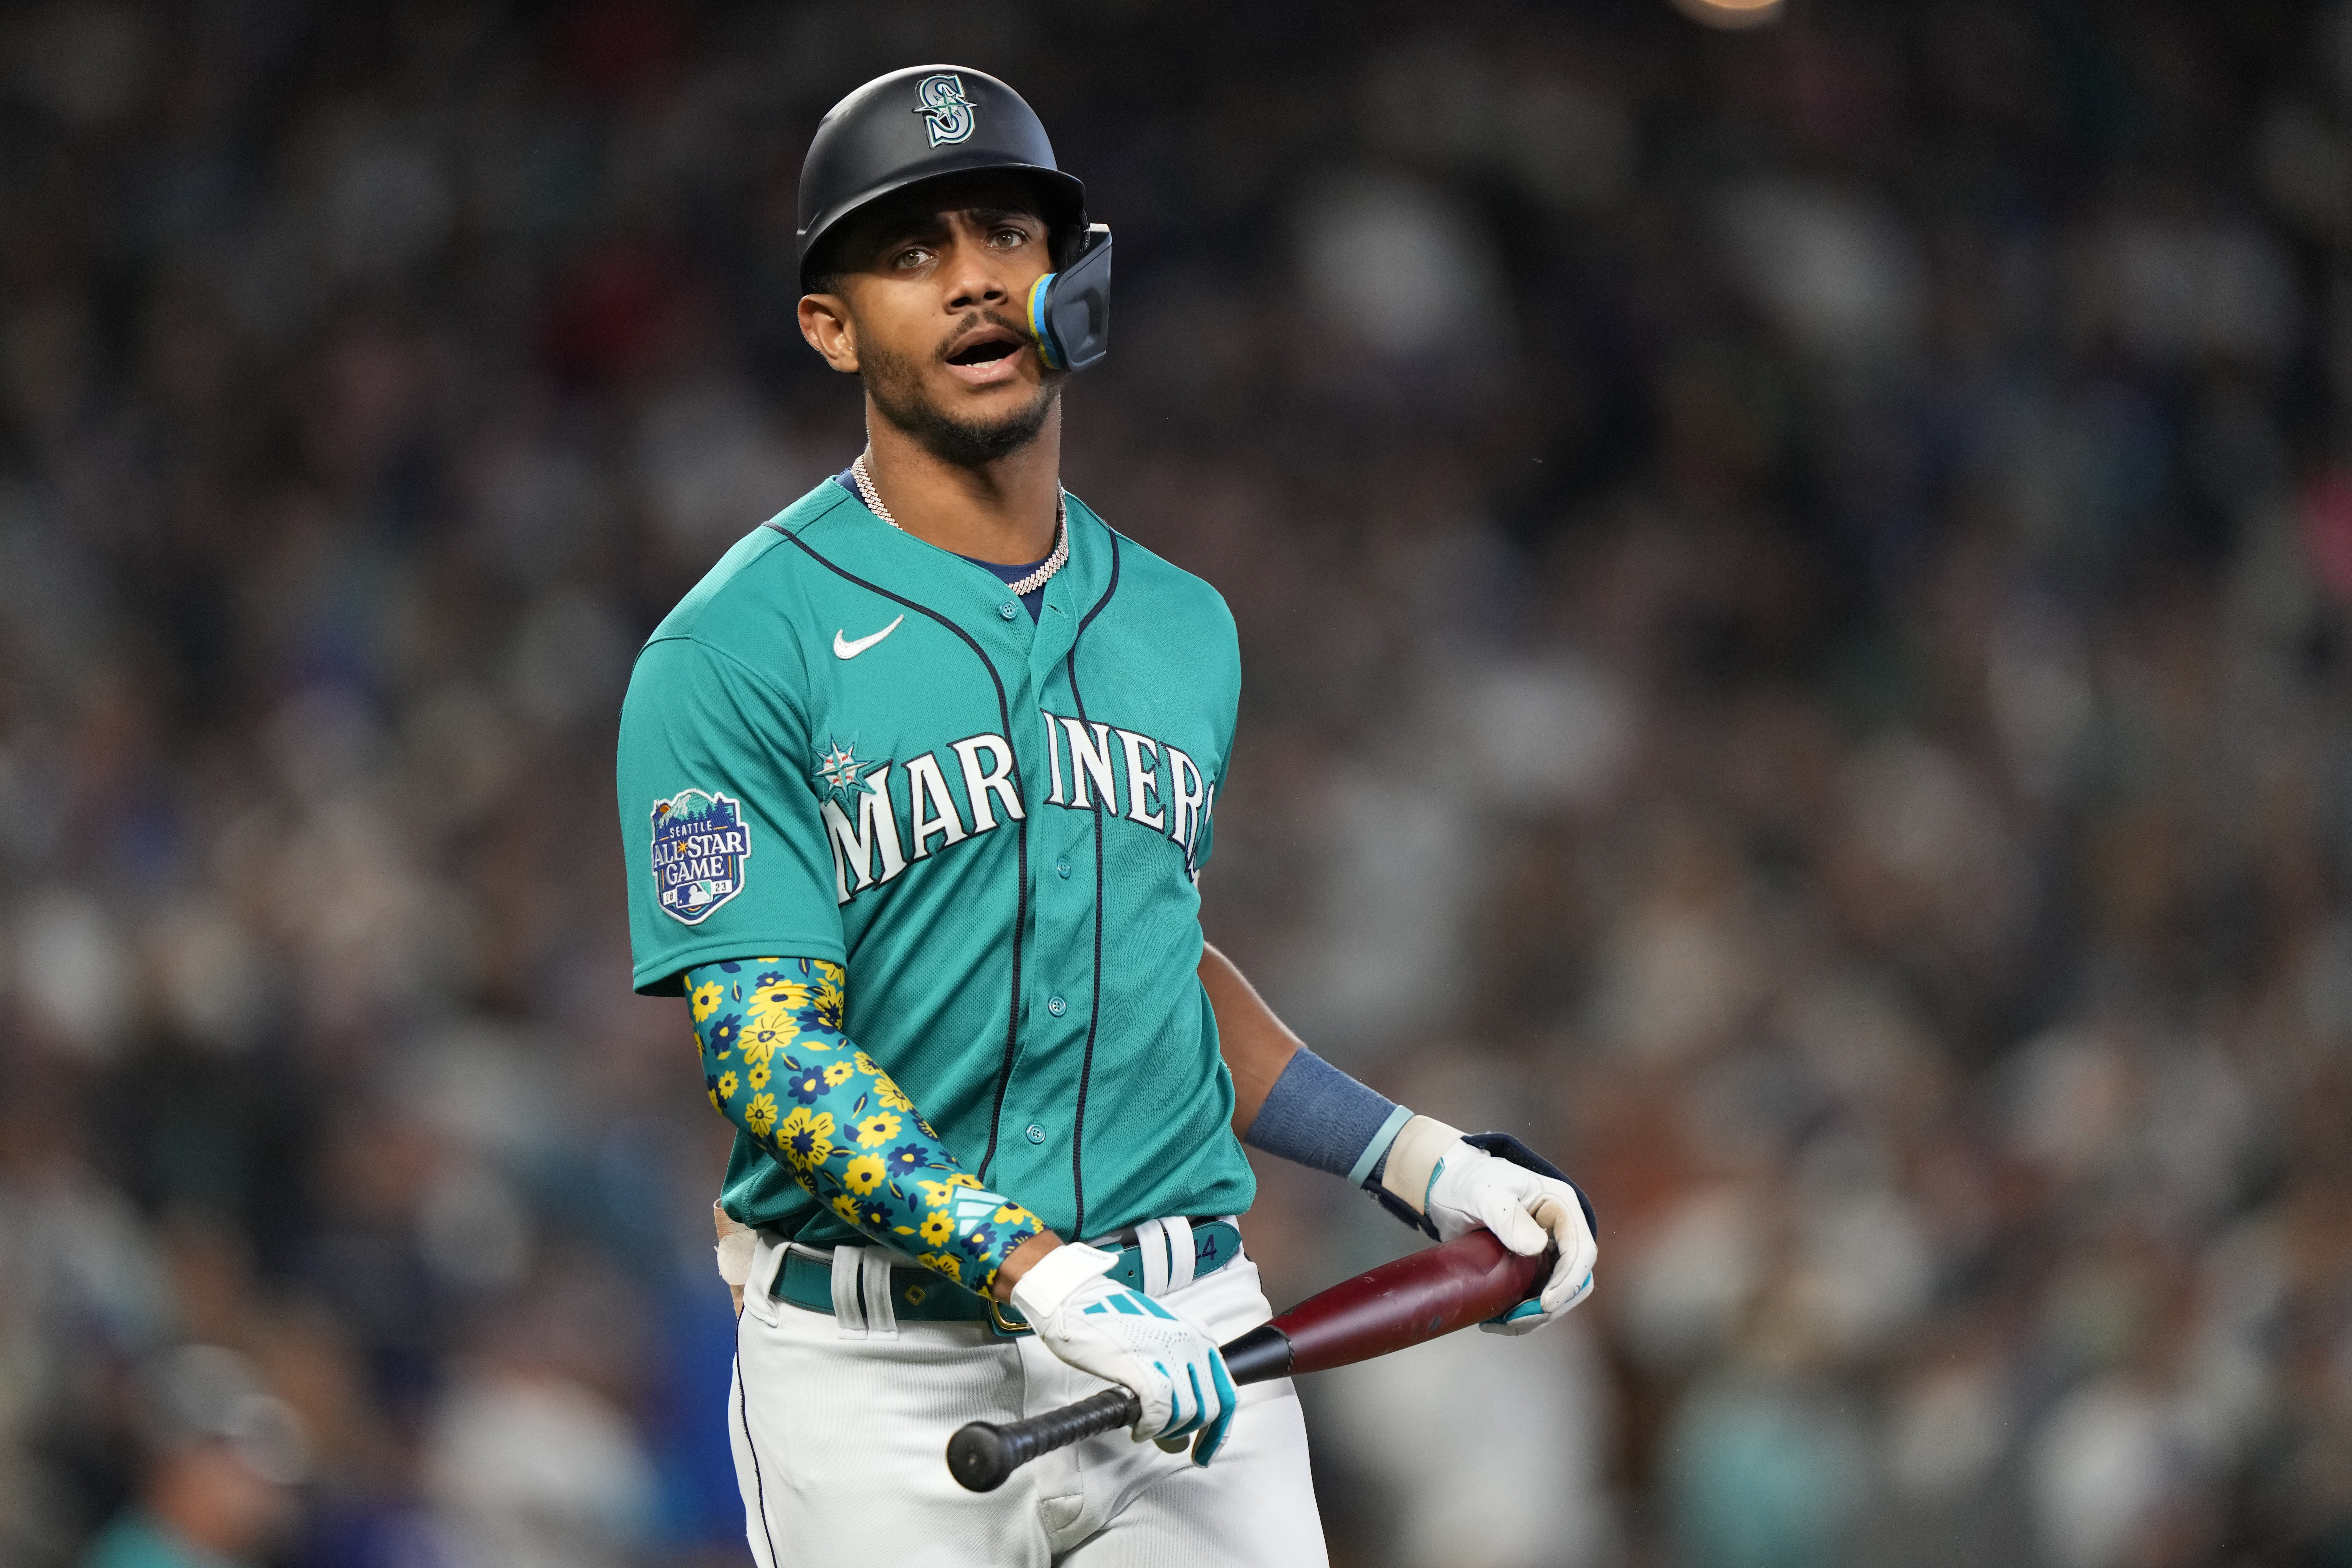 We should all be proud': What Seattle Mariners All-Stars had to